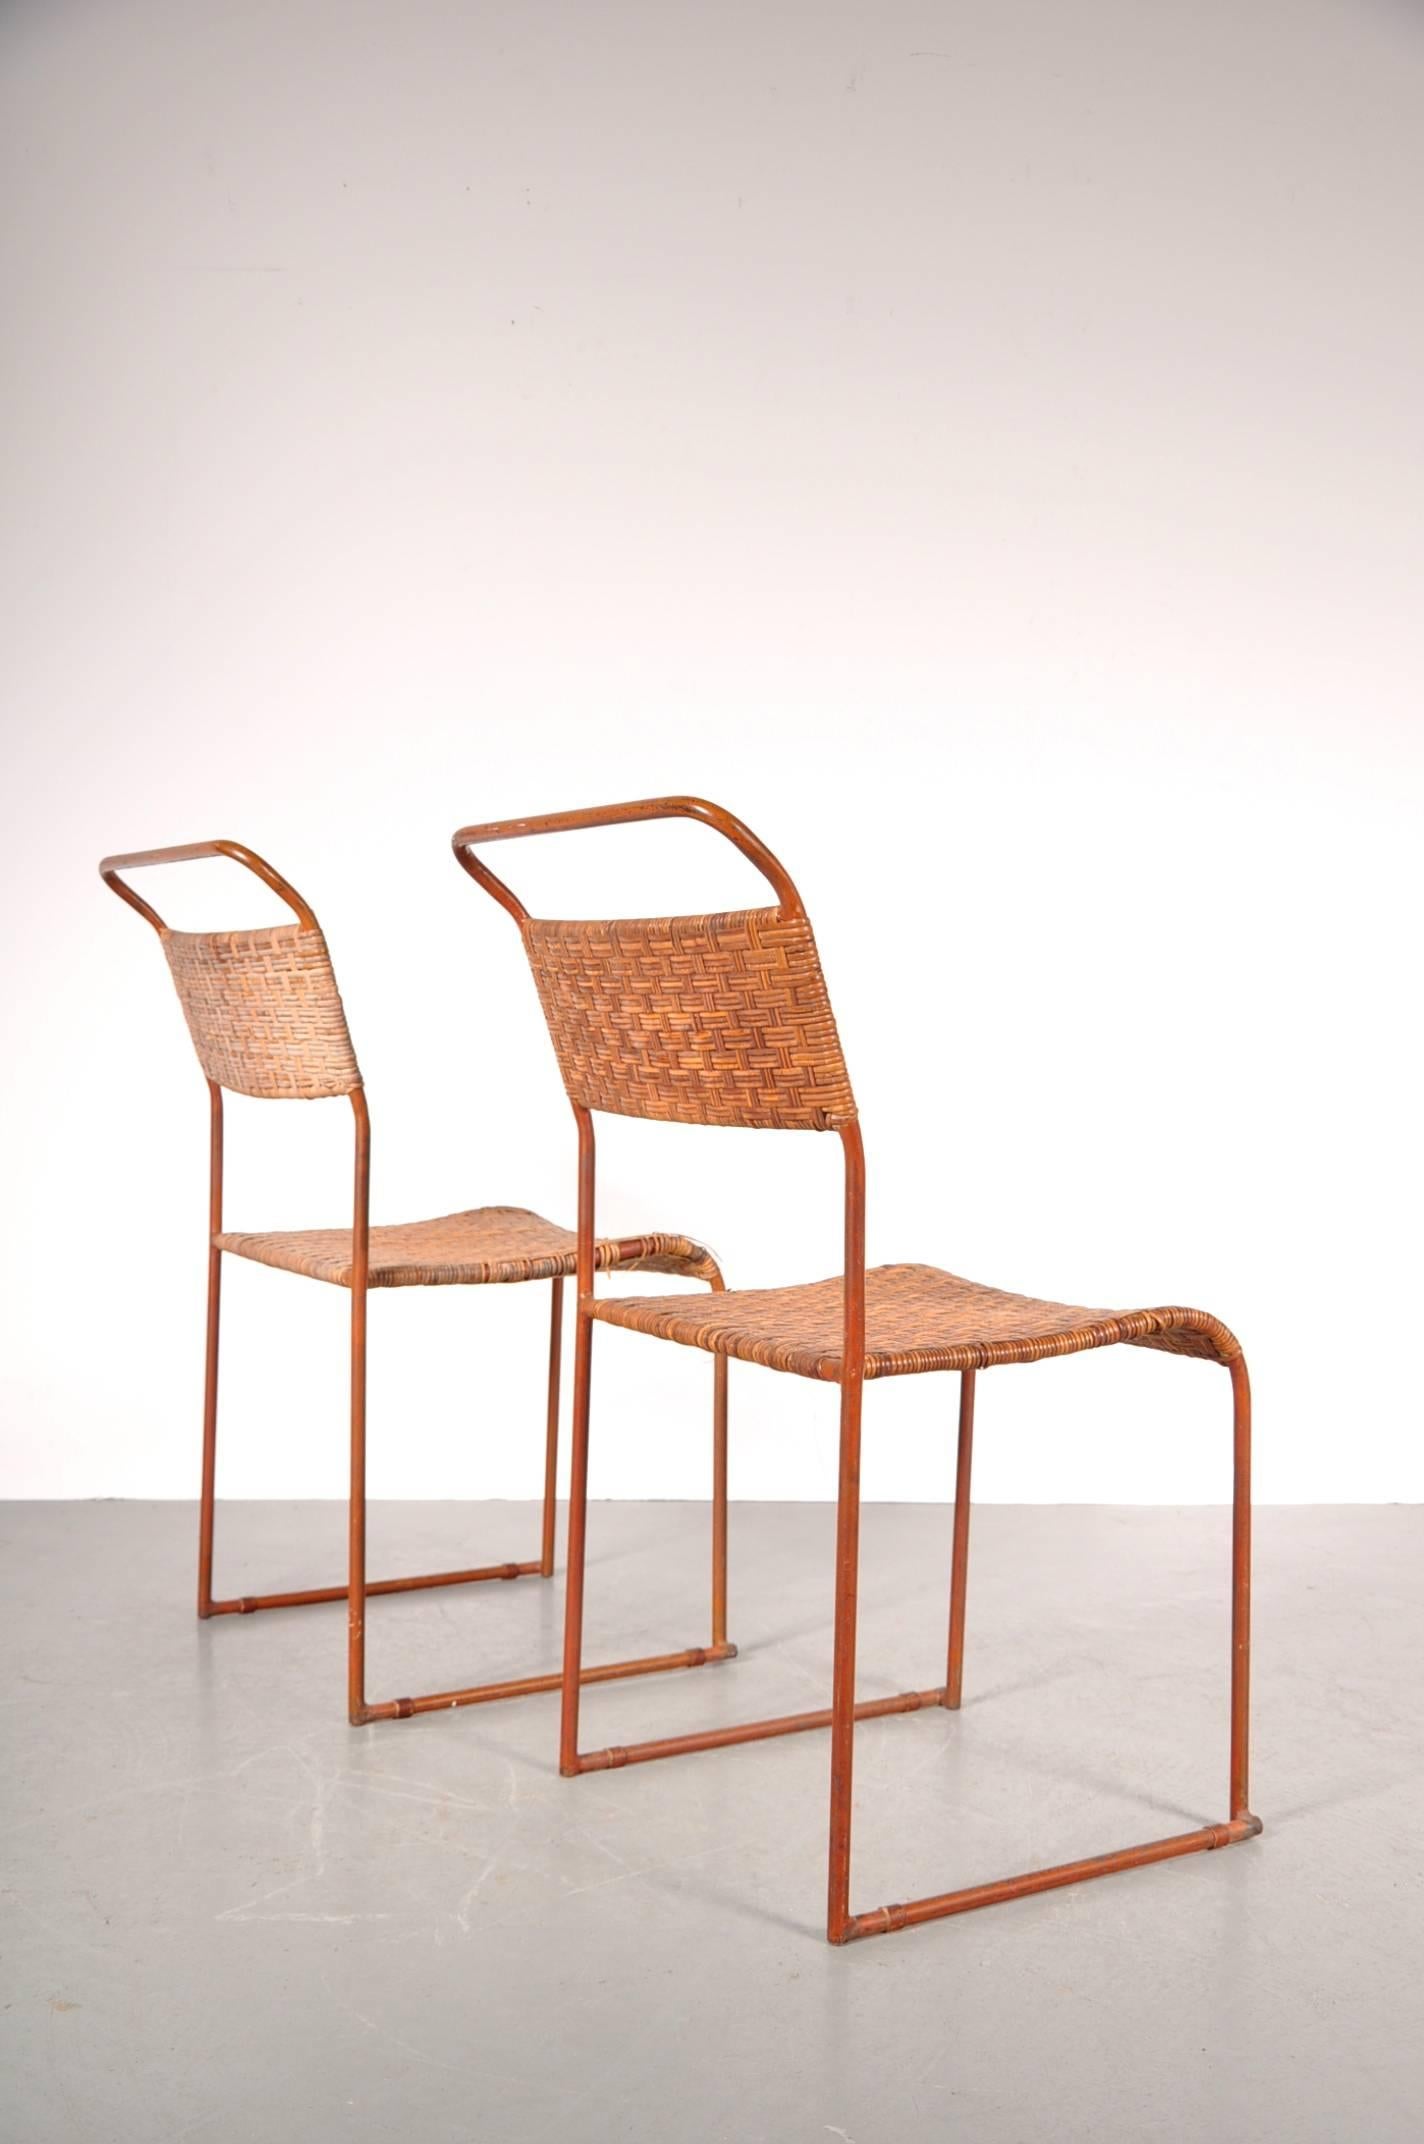 Amazing set of two rare Bauhaus prototype dining chairs, manufactured around 1930.

These beautifully crafted chairs have a metal base with woven rattan seats and backrests. One of the chairs is still in good condition, the other chair needs